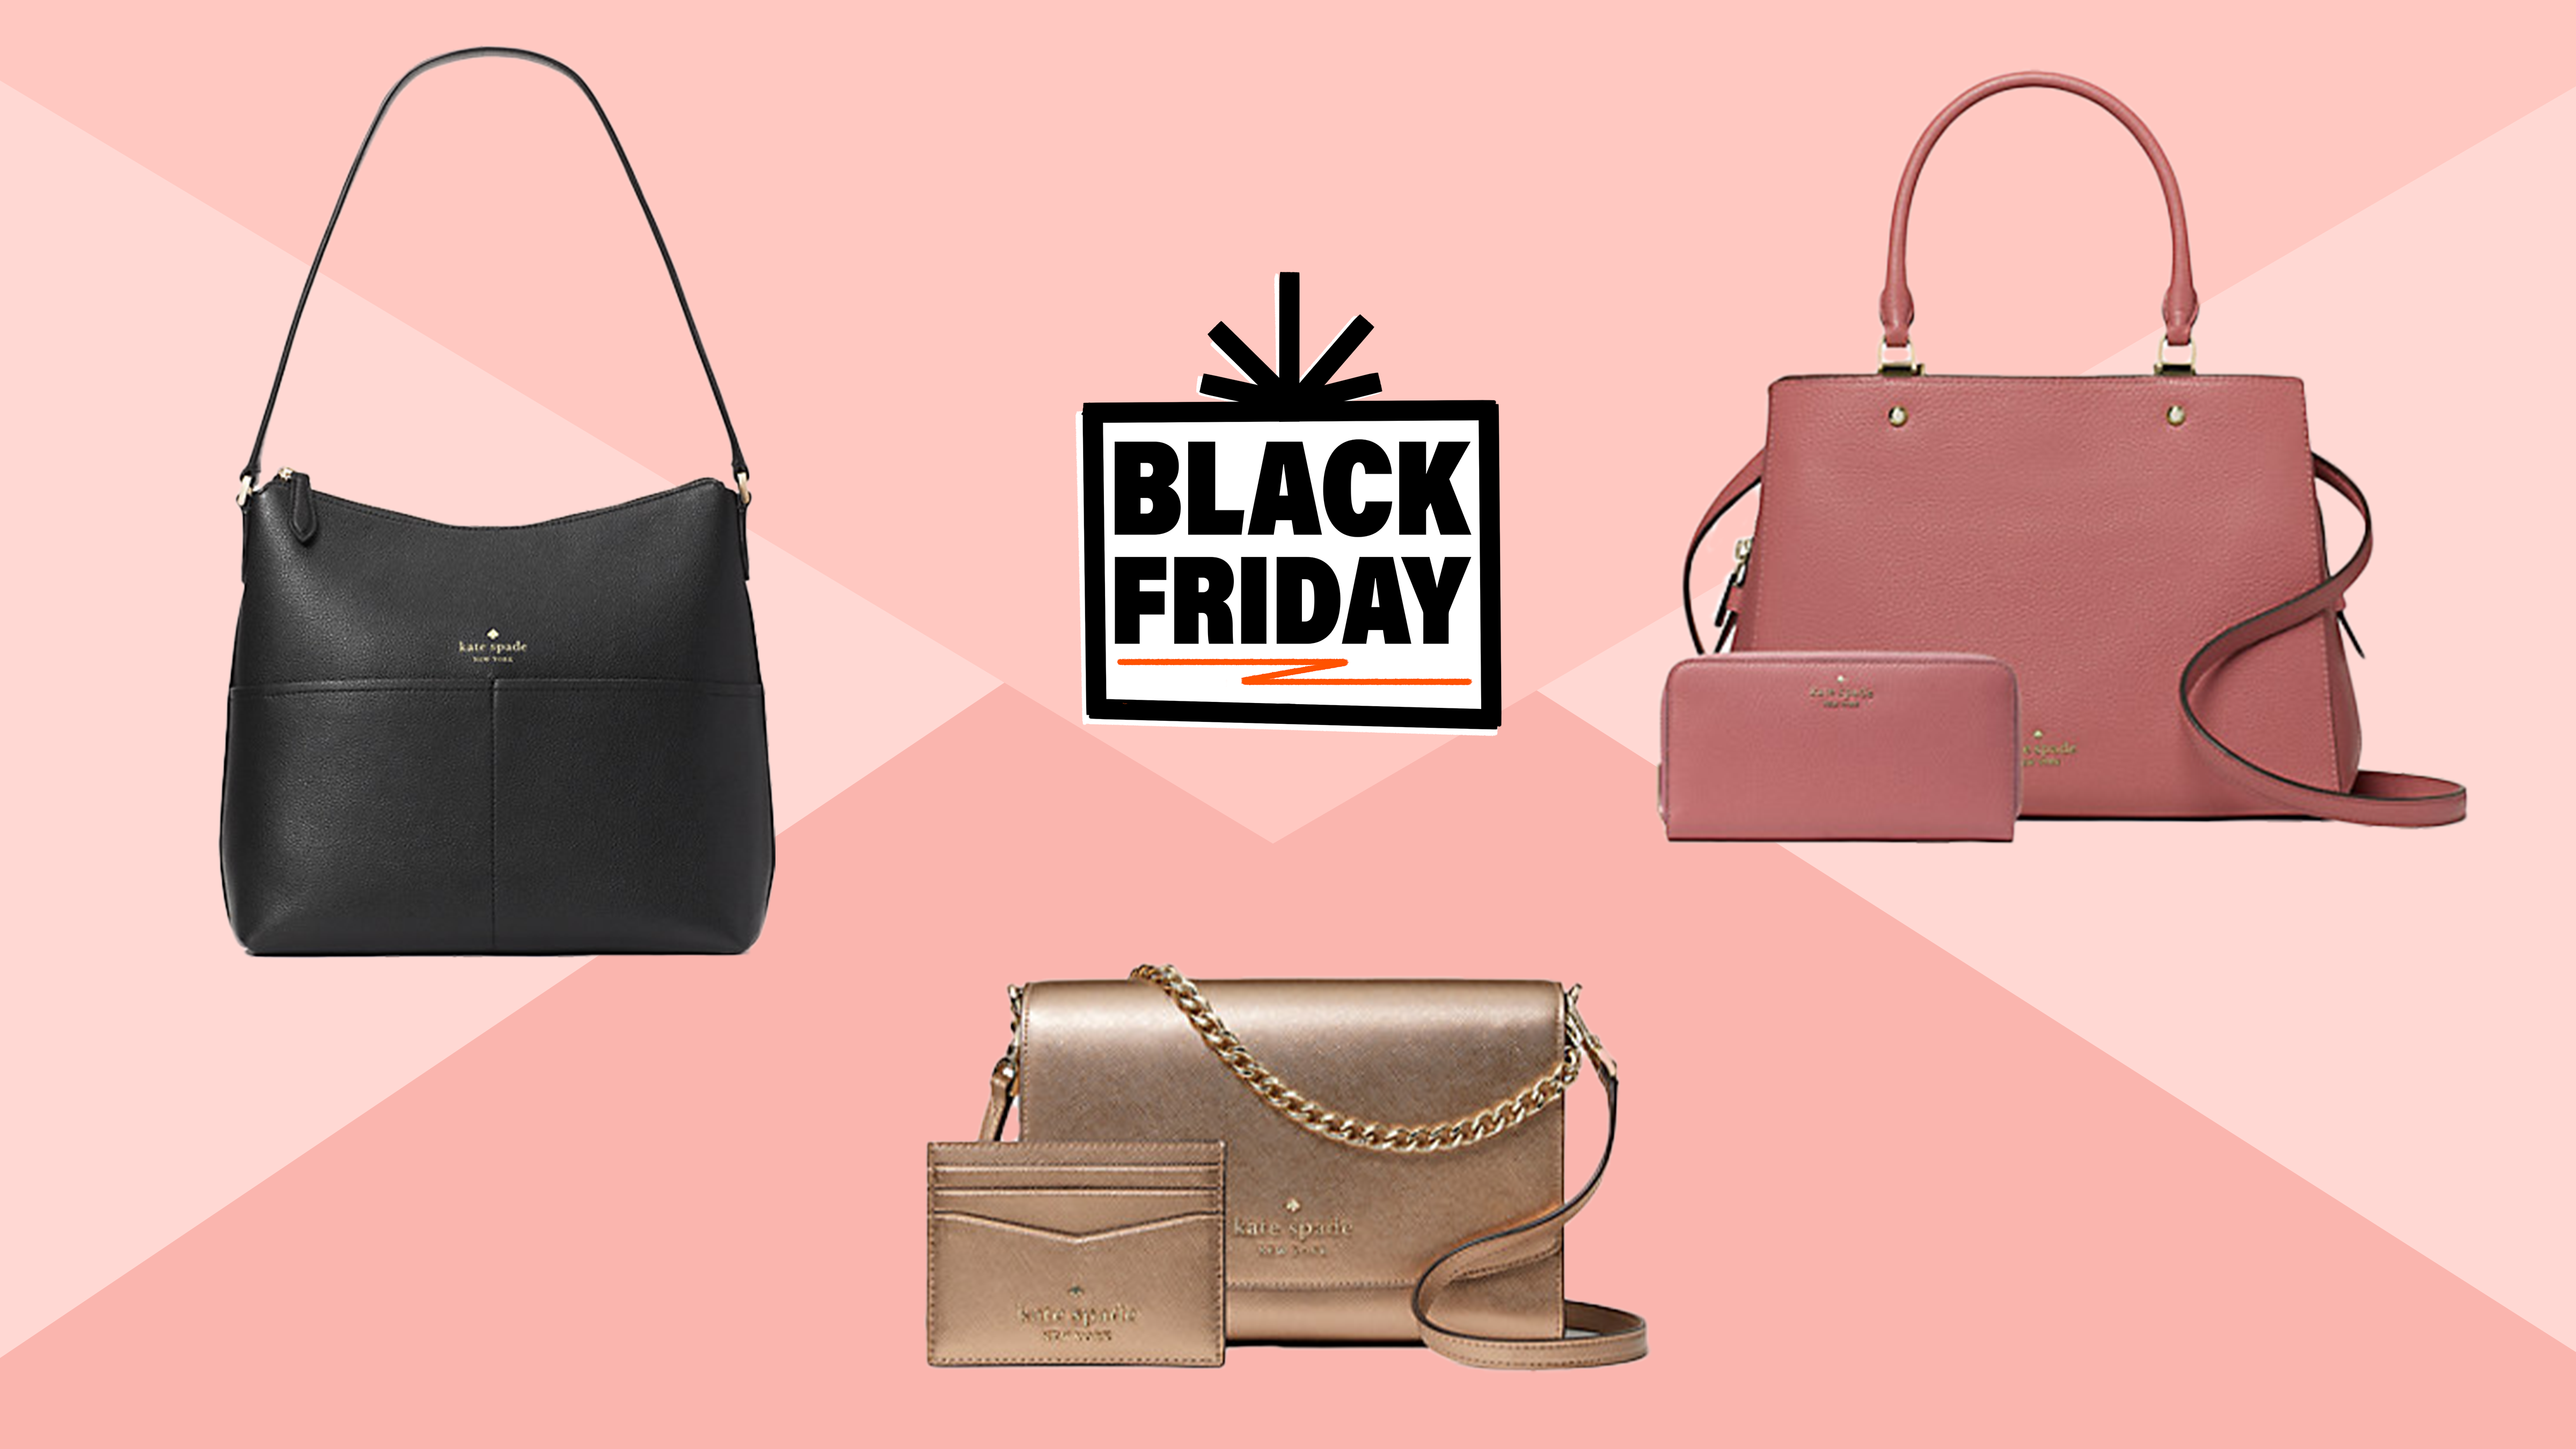 Kate Spade Black Friday isn't over yet—save big on purses at Kate Spade Surprise